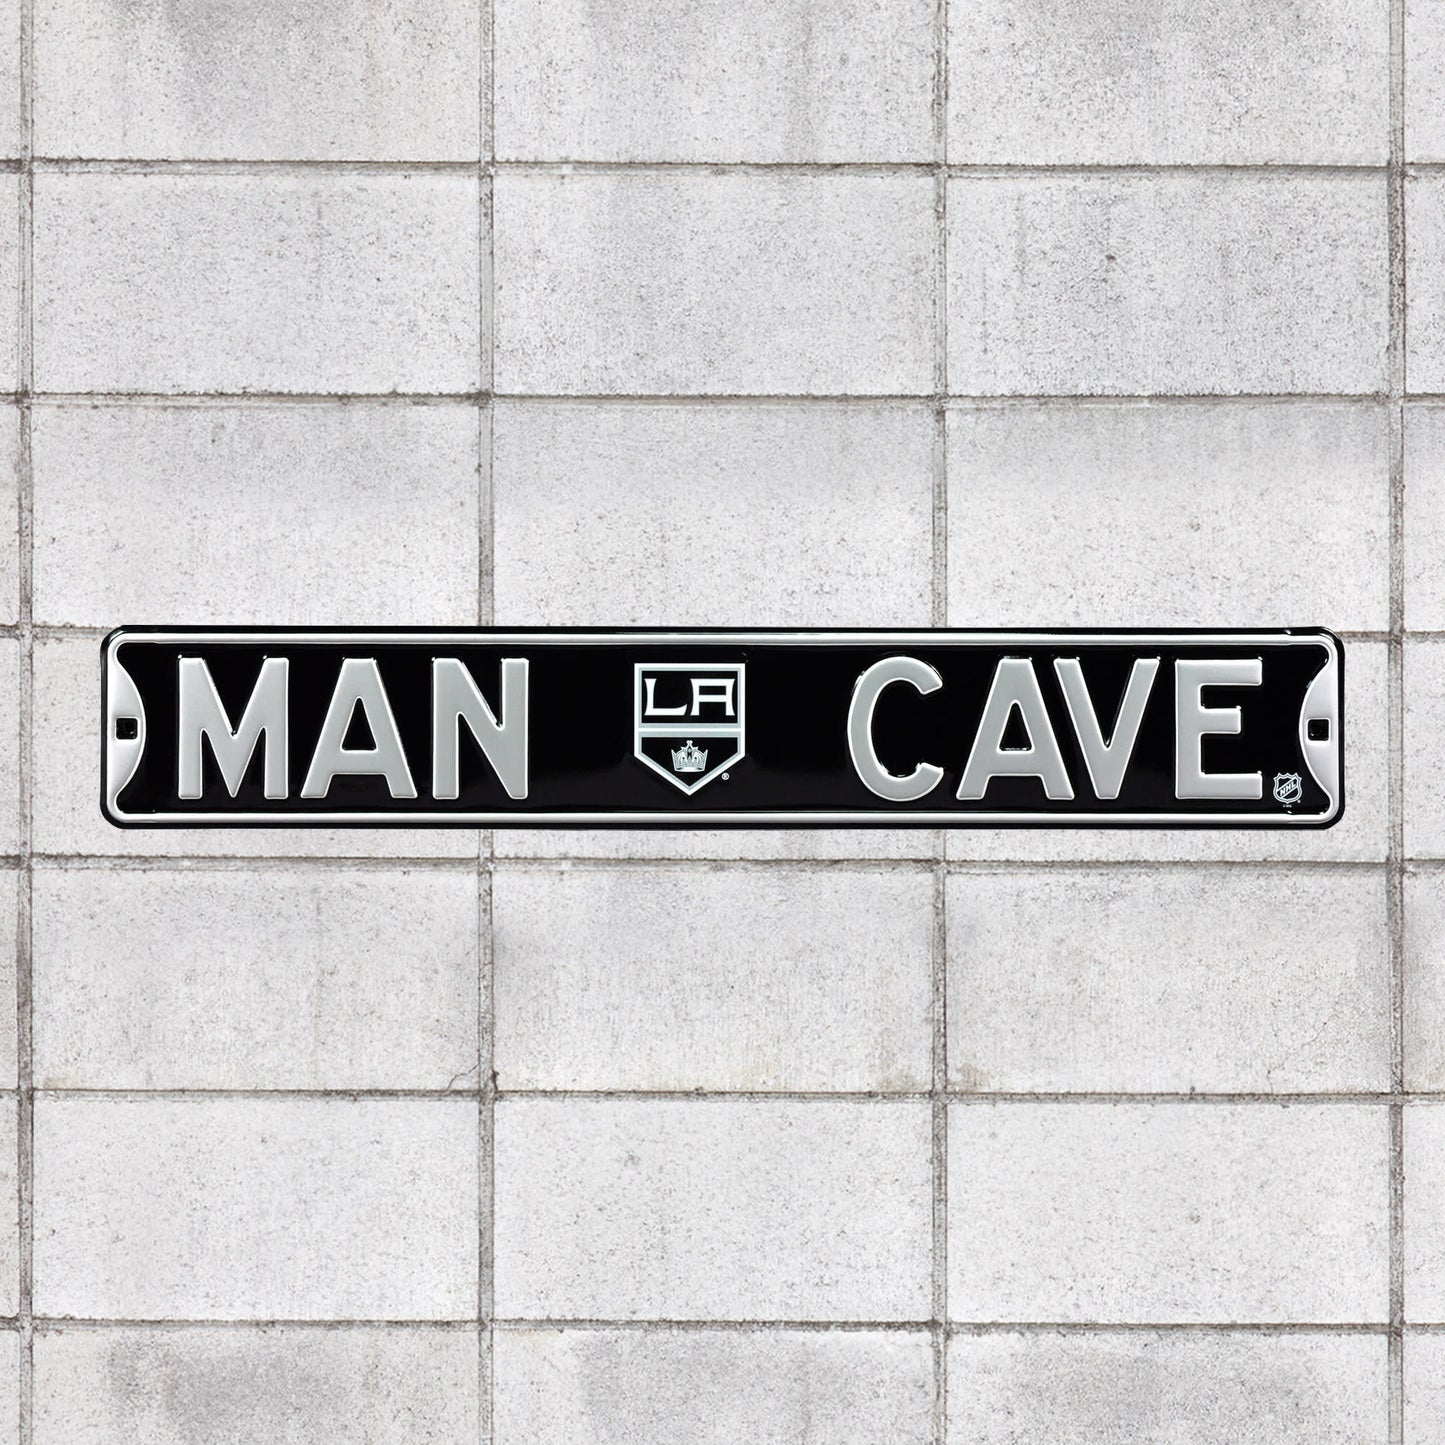 Los Angeles Kings: Man Cave - Officially Licensed NHL Metal Street Sign